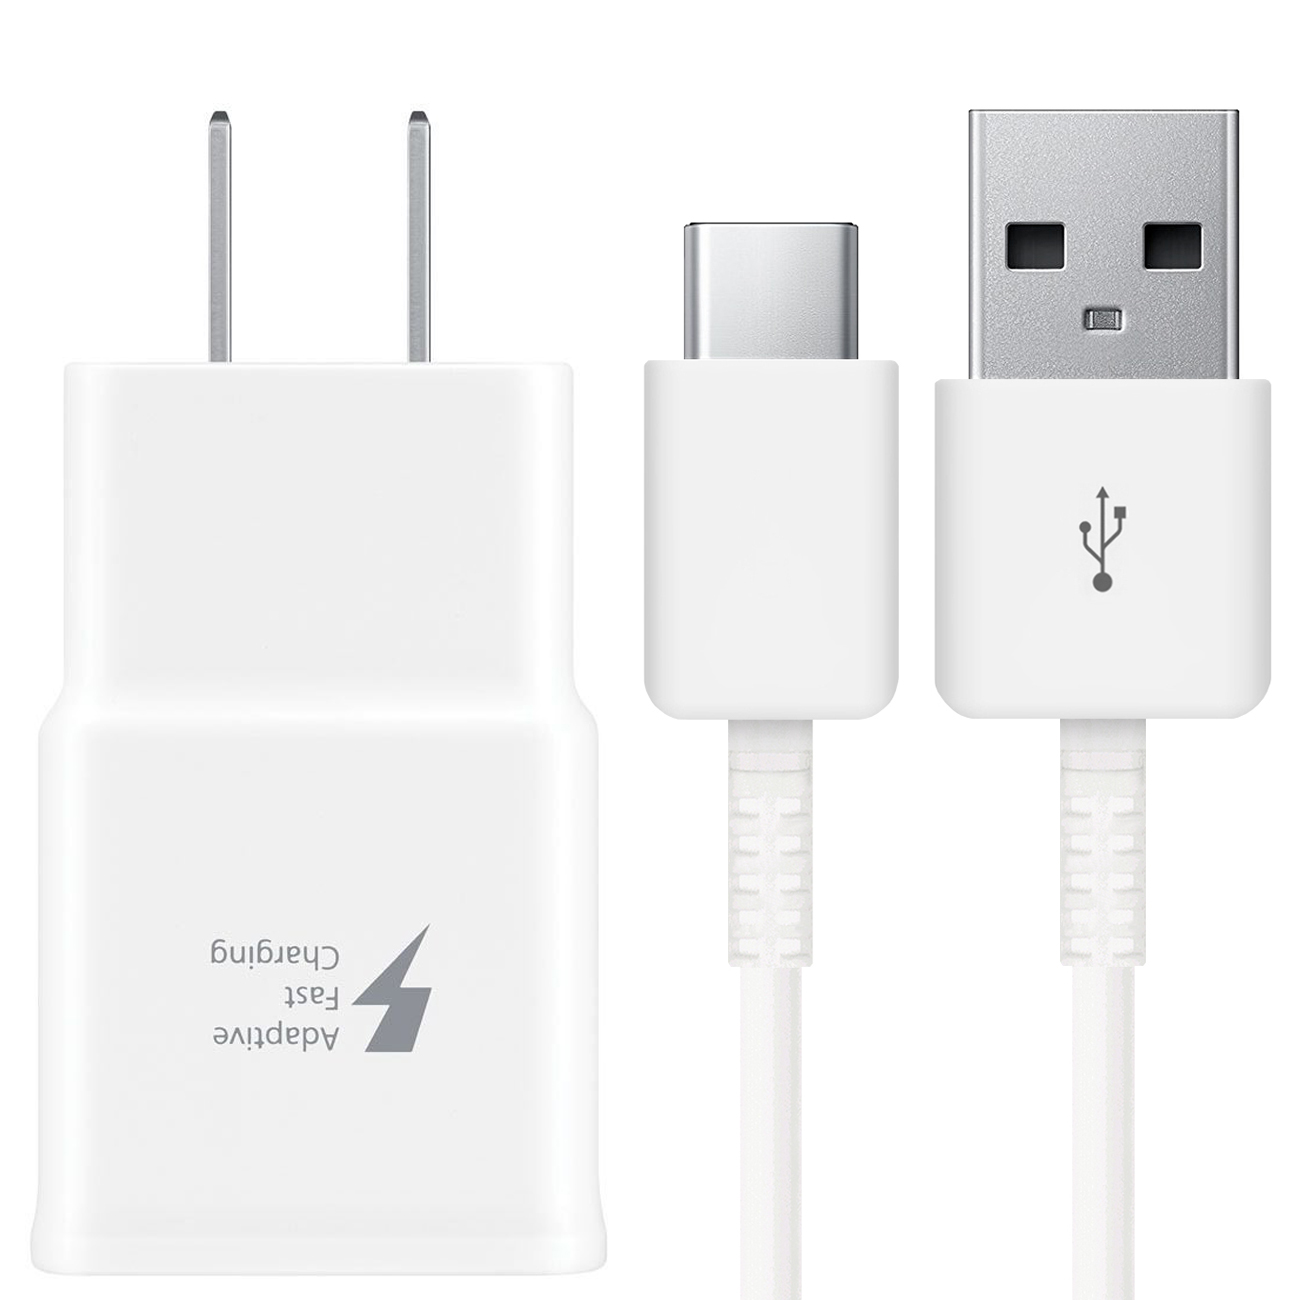 OEM Adaptive Fast Charging USB Wall Charger Plug with 4FT USB Type C Cable Replacement for Samsung Galaxy S9 S9 Plus S8 S8 Plus S10 S10+ Plus Note 10 Note 9 Note 8, Fast Charger LG HTC Huawei OnePlus - image 1 of 3